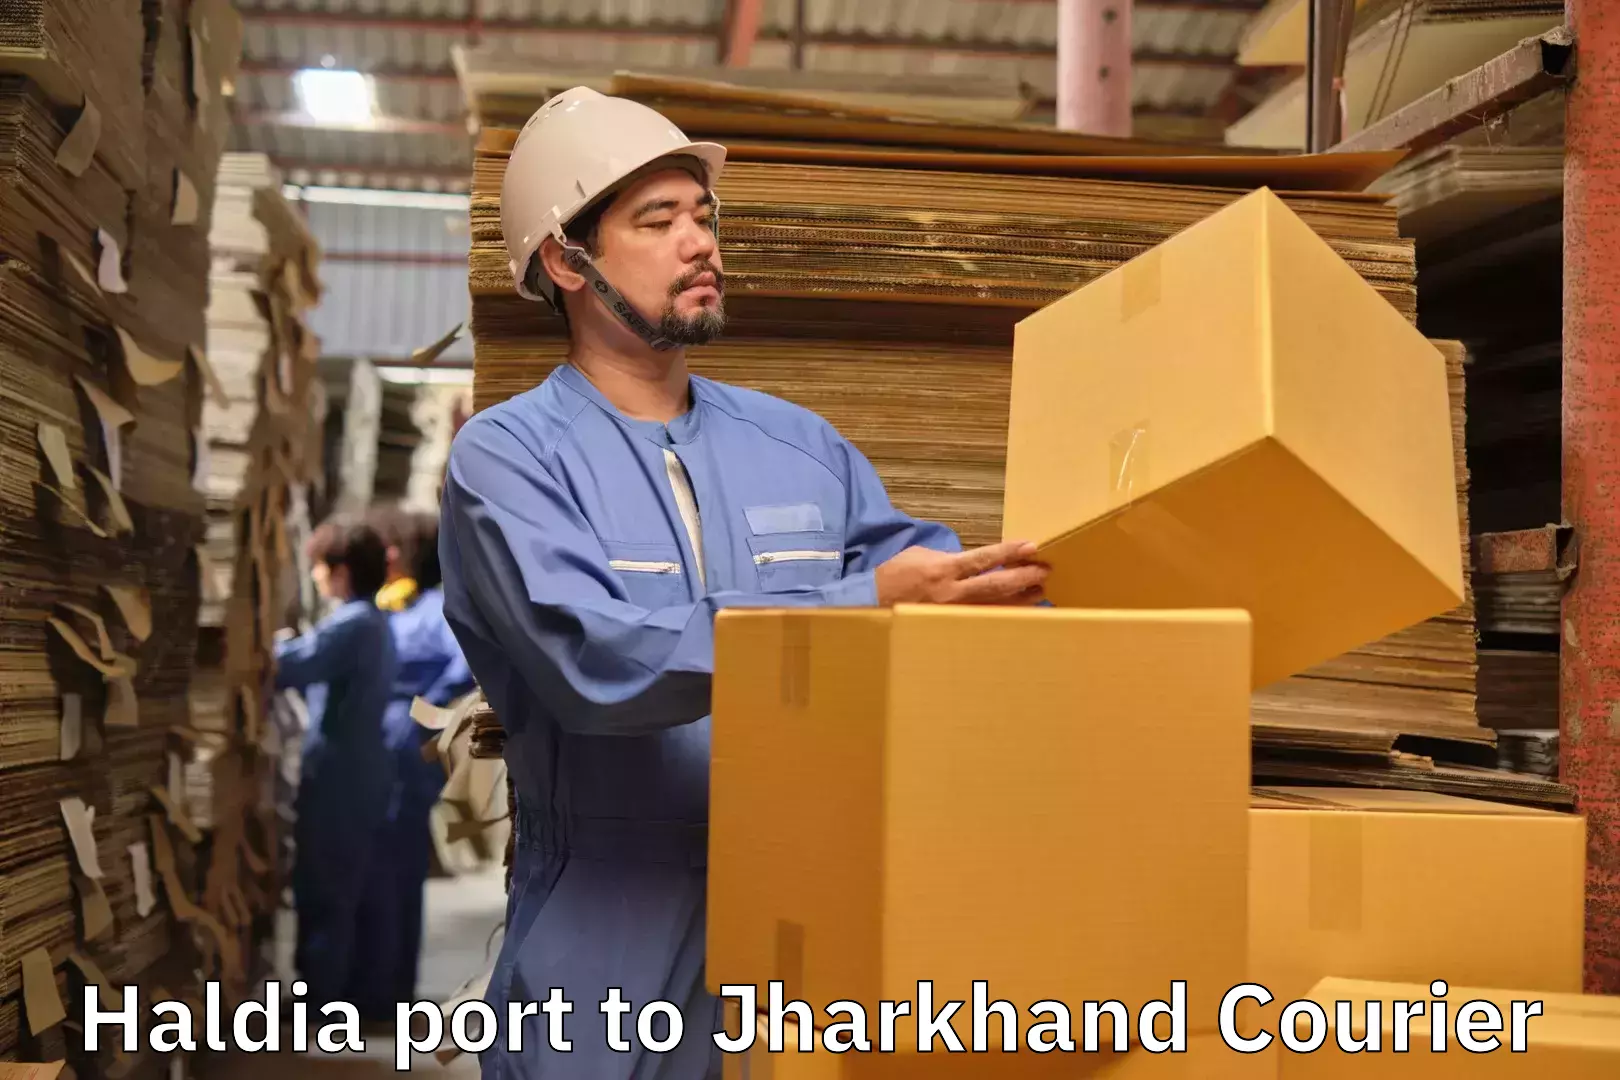 Luggage delivery network Haldia port to Jharkhand